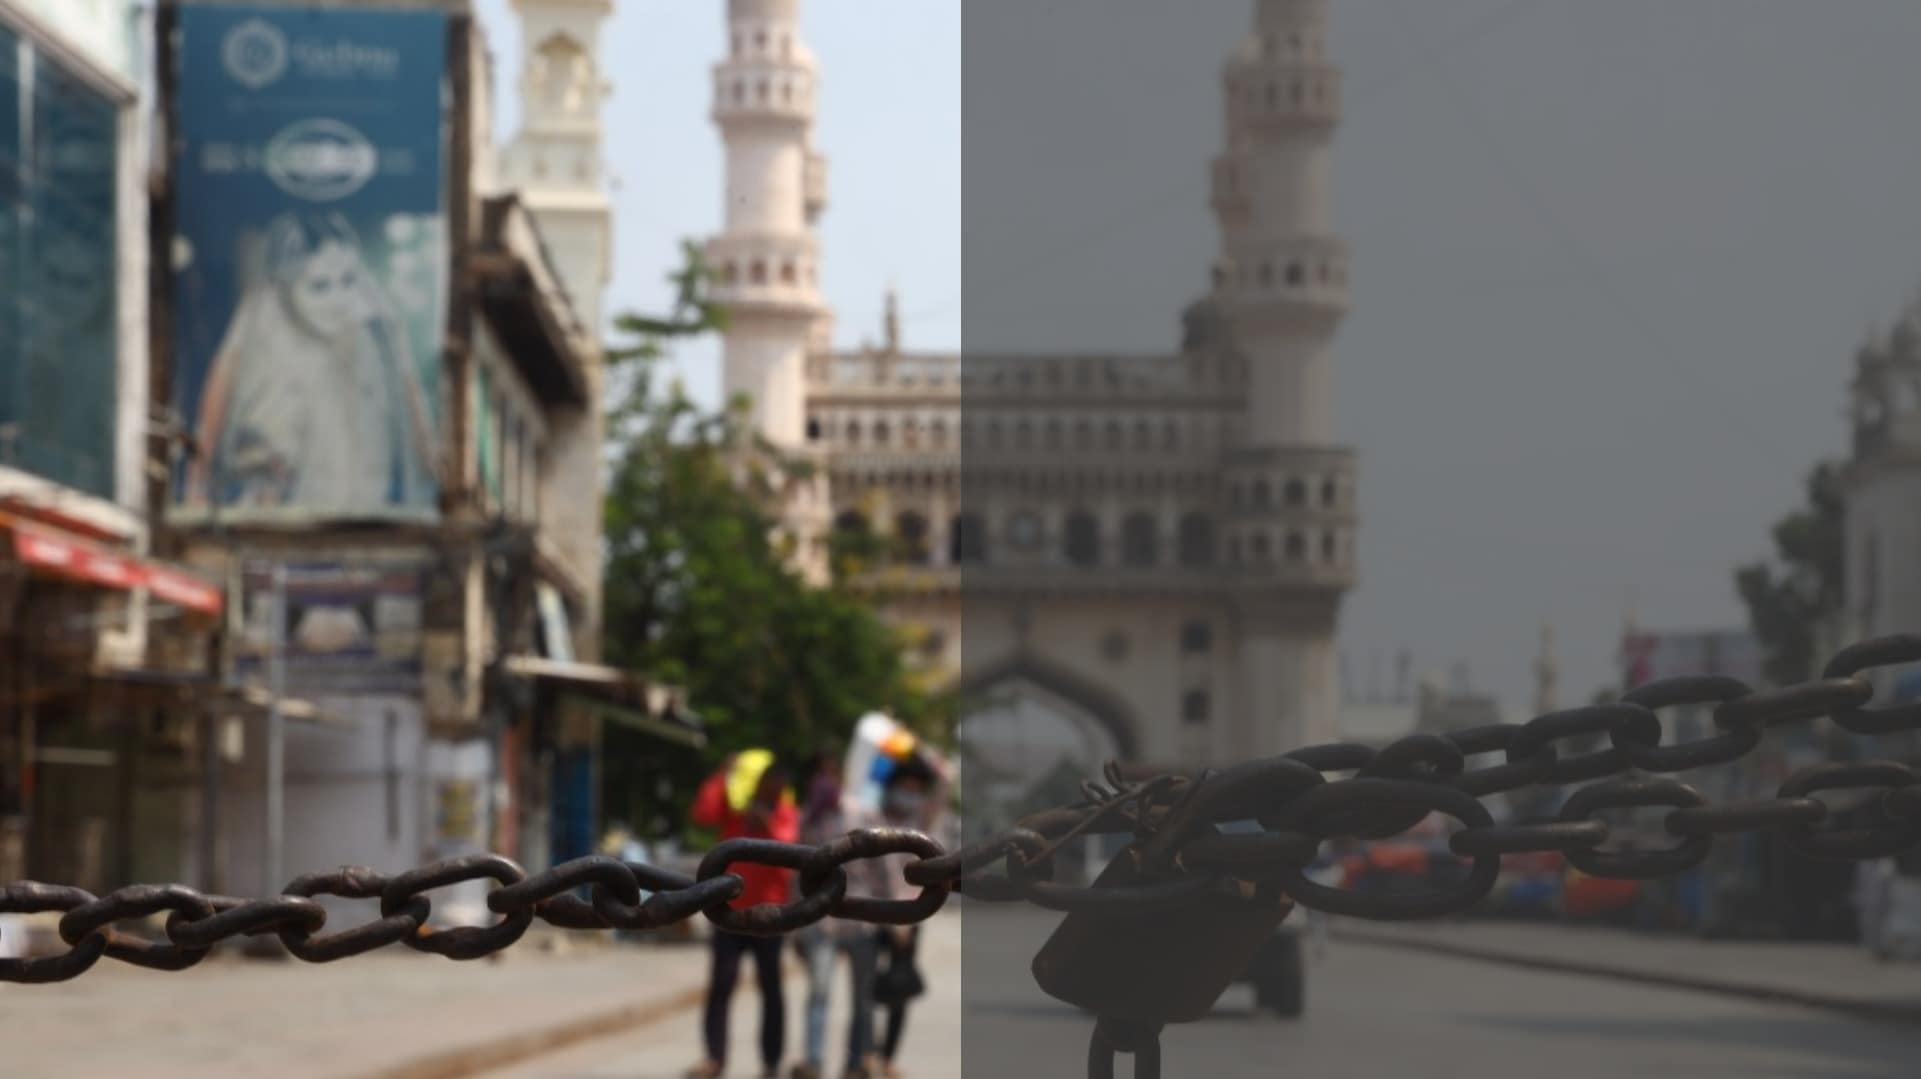 In Hyderabad's Old City, once festive streets are bereft of usual Ramzan fervour in lockdown